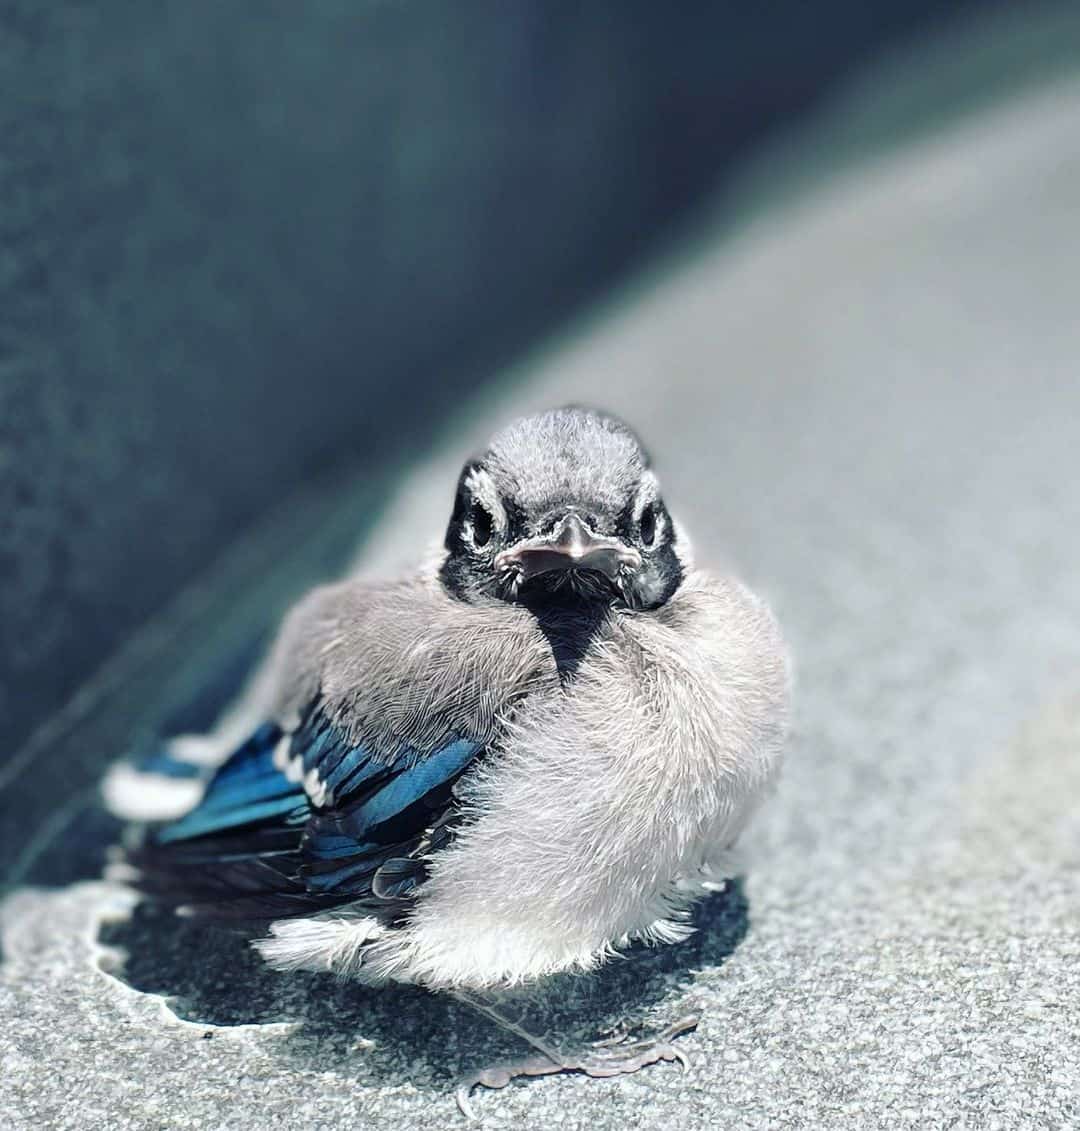 How To Feed A Baby Blue Jay At Home